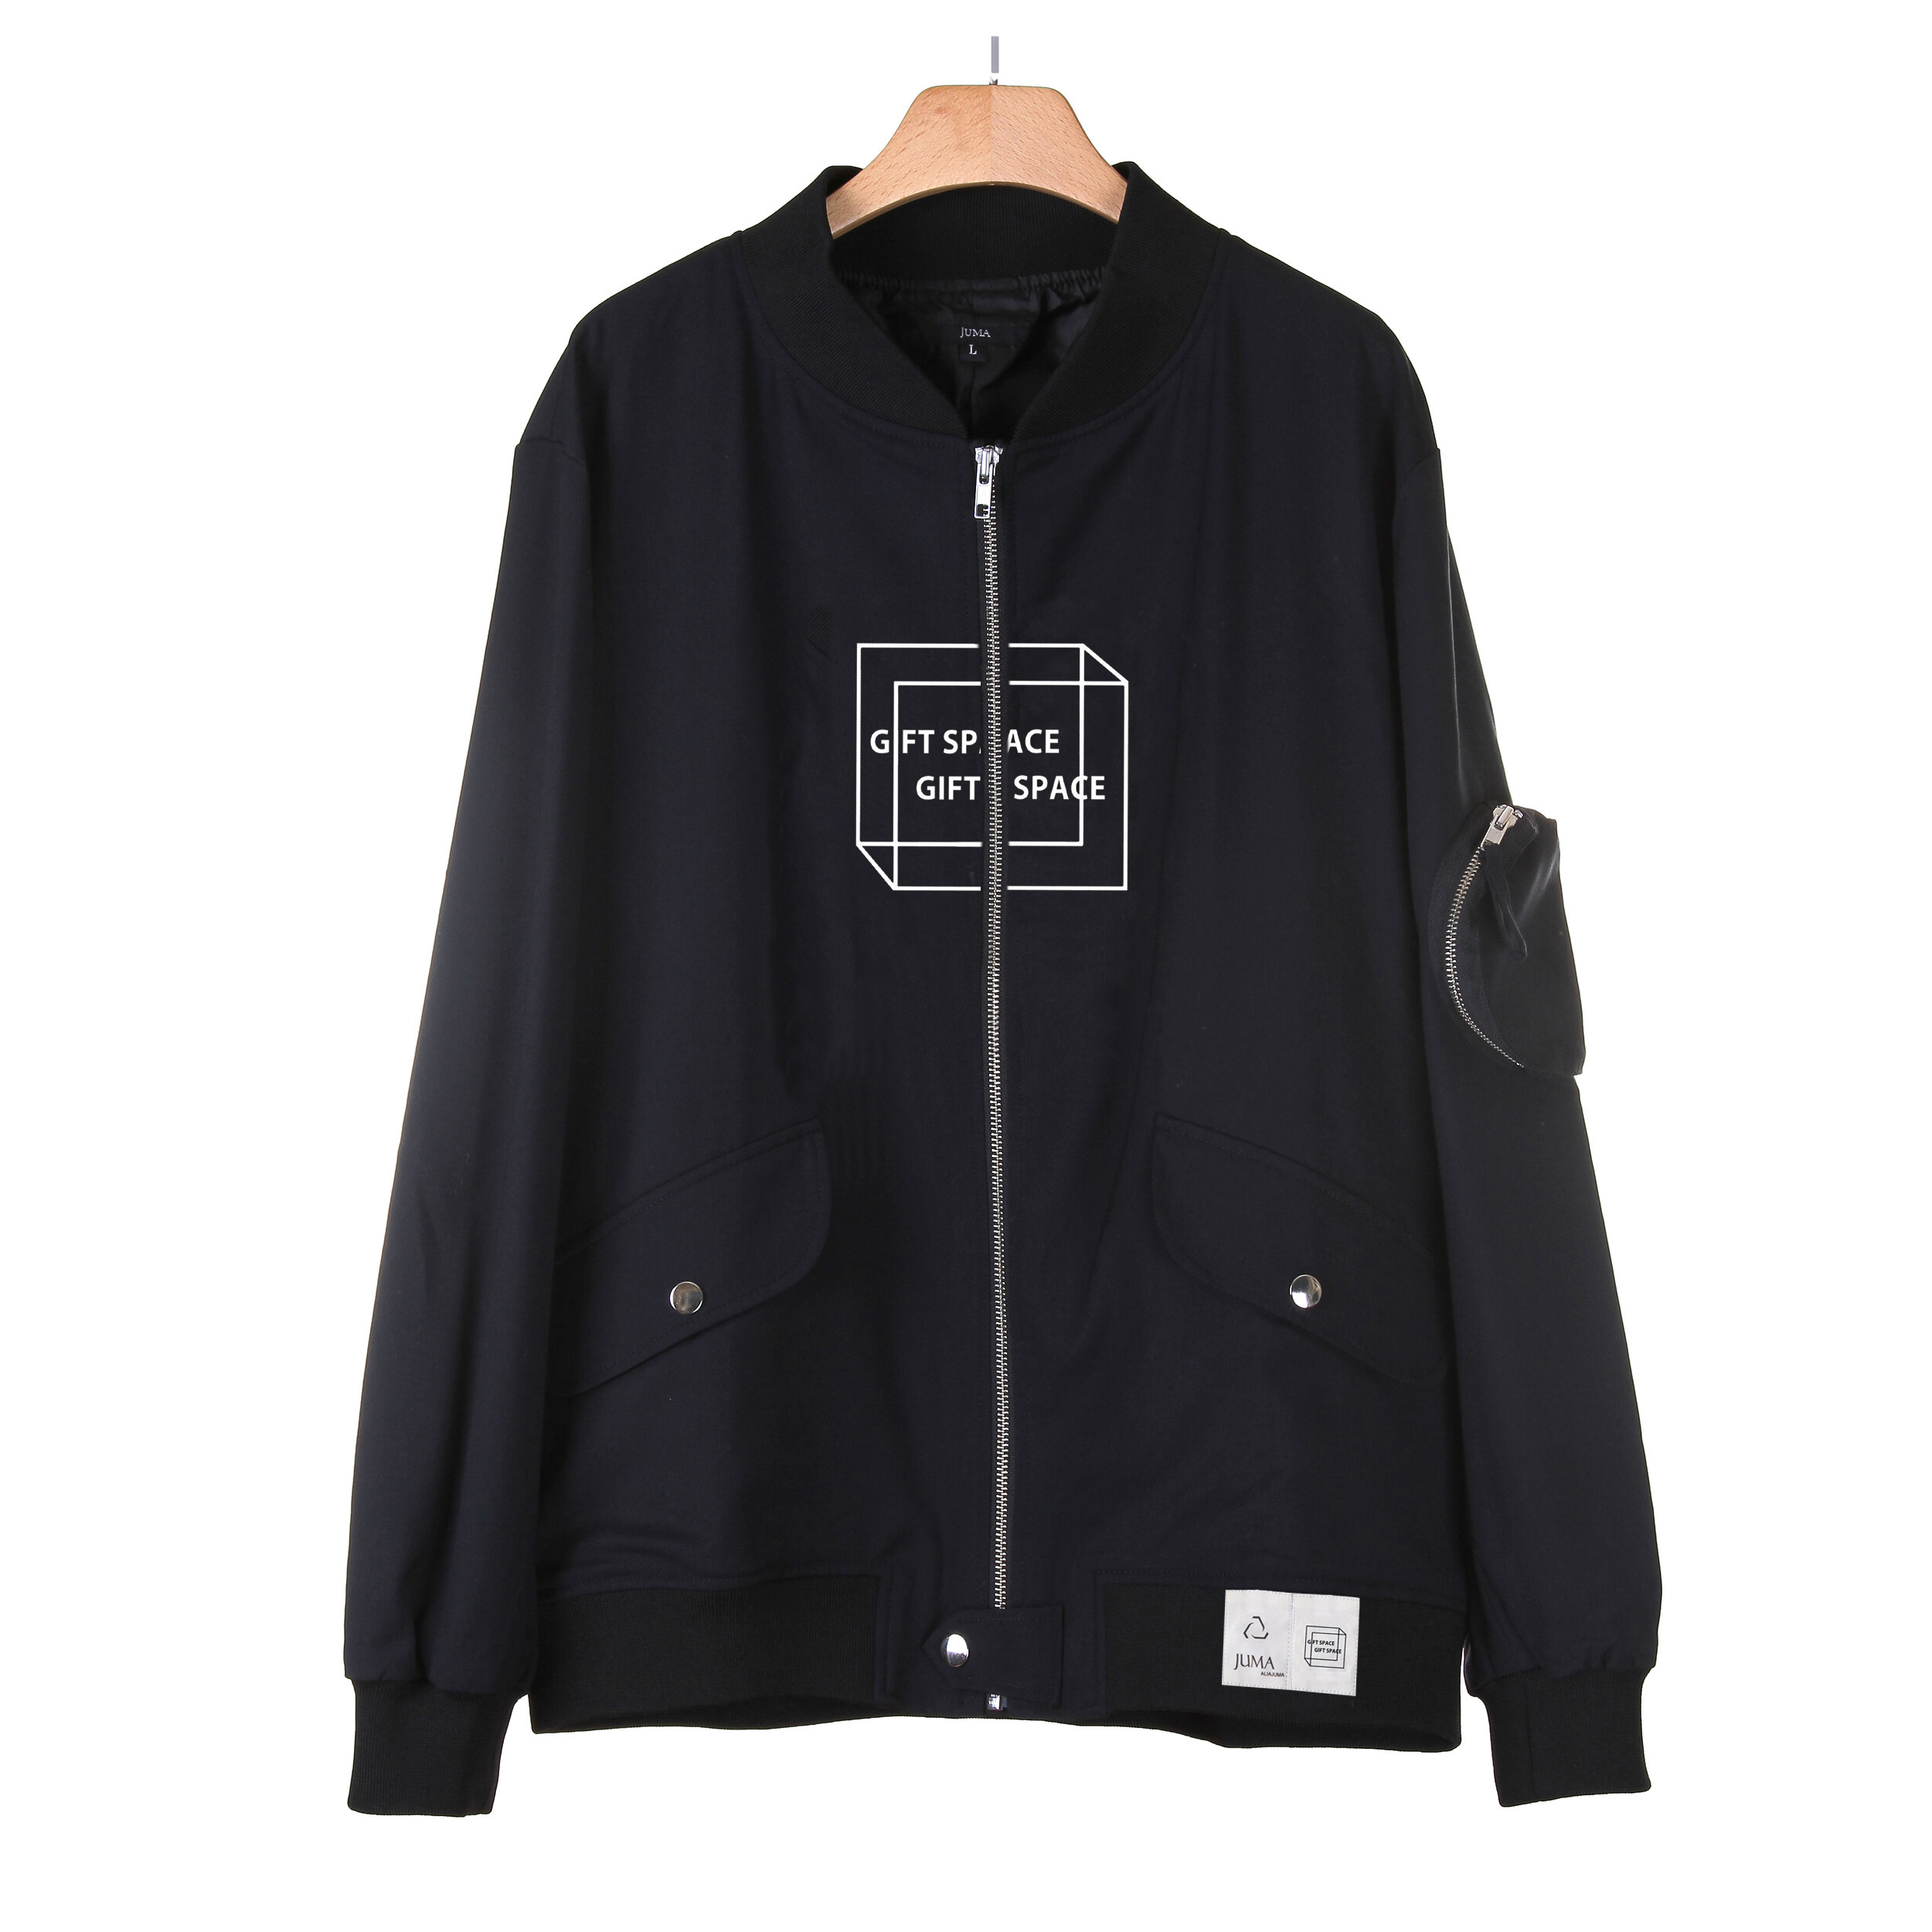 Gift Space 棒球服夹克-8个回收水瓶-黑色｜Gift Space Zip up Bomber Jacket - 8 Recycled Water Bottles - Black